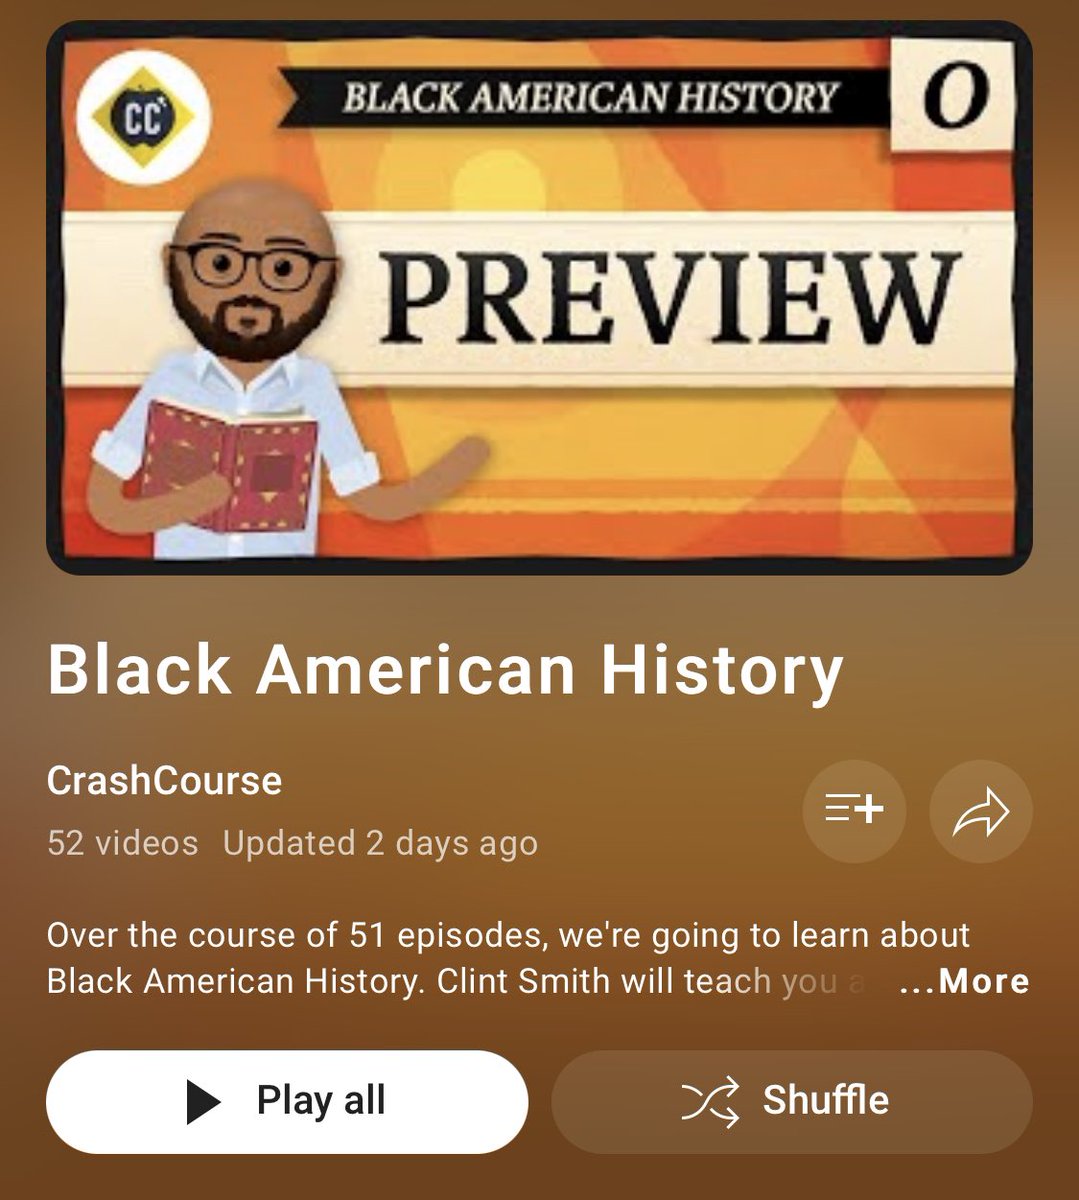 This week we put out the final episode of Crash Course Black American History. We worked on this series for over 3 years and put out 51 episodes spanning the transatlantic slave trade to the Black Lives Matter movement. I’m so proud of what we made. youtube.com/playlist?list=…